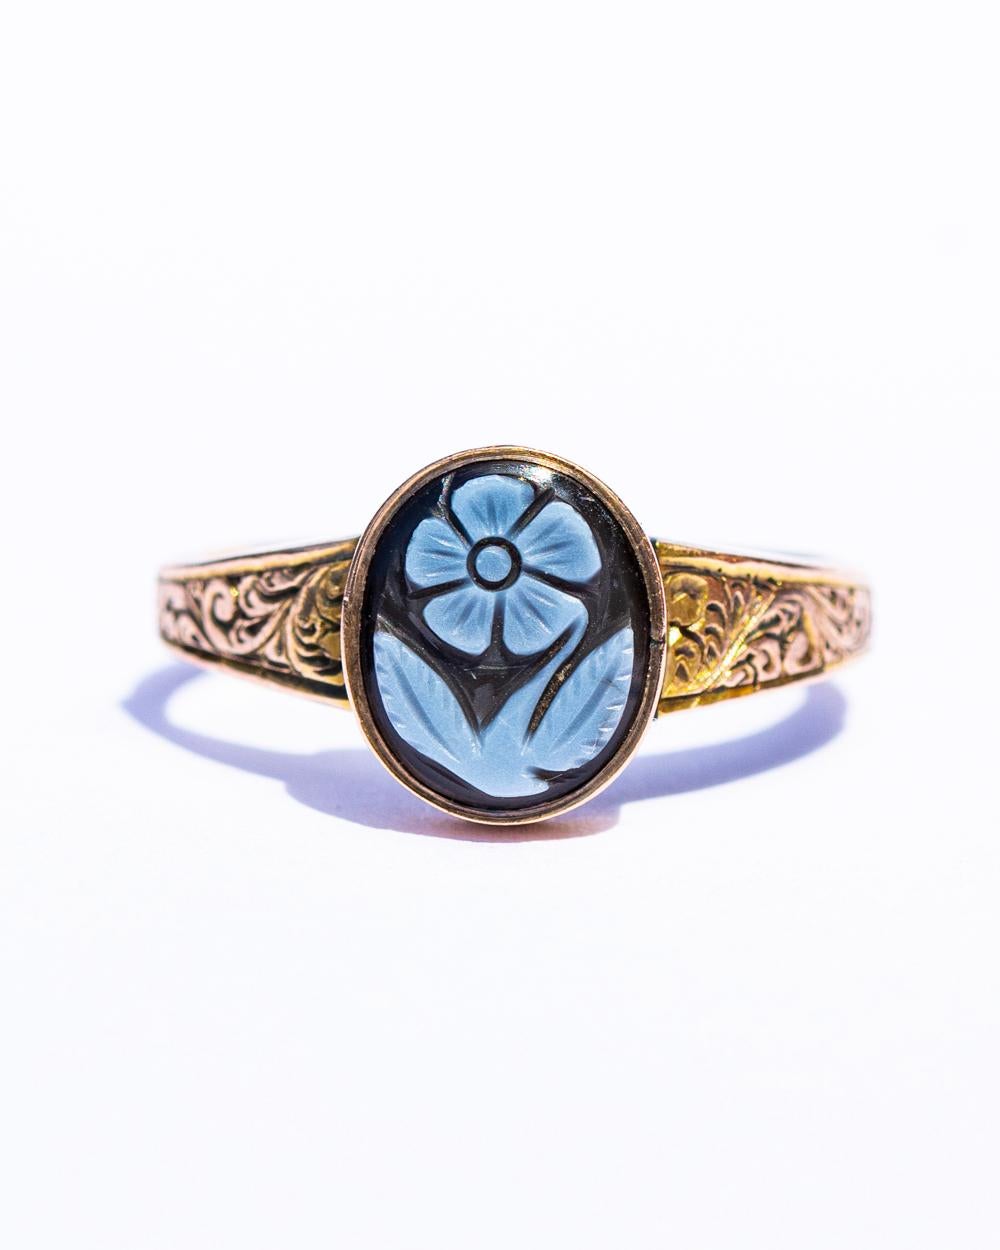 An early Victorian hard stone memorial ring, with an oval carved sardonyx forget-me-not, rub set to the head with a glazed locket verso, curved shoulders and a later shank, modelled in 22carat gold 

size N 1/2 or 7
10 x 18mm, 

2.82g